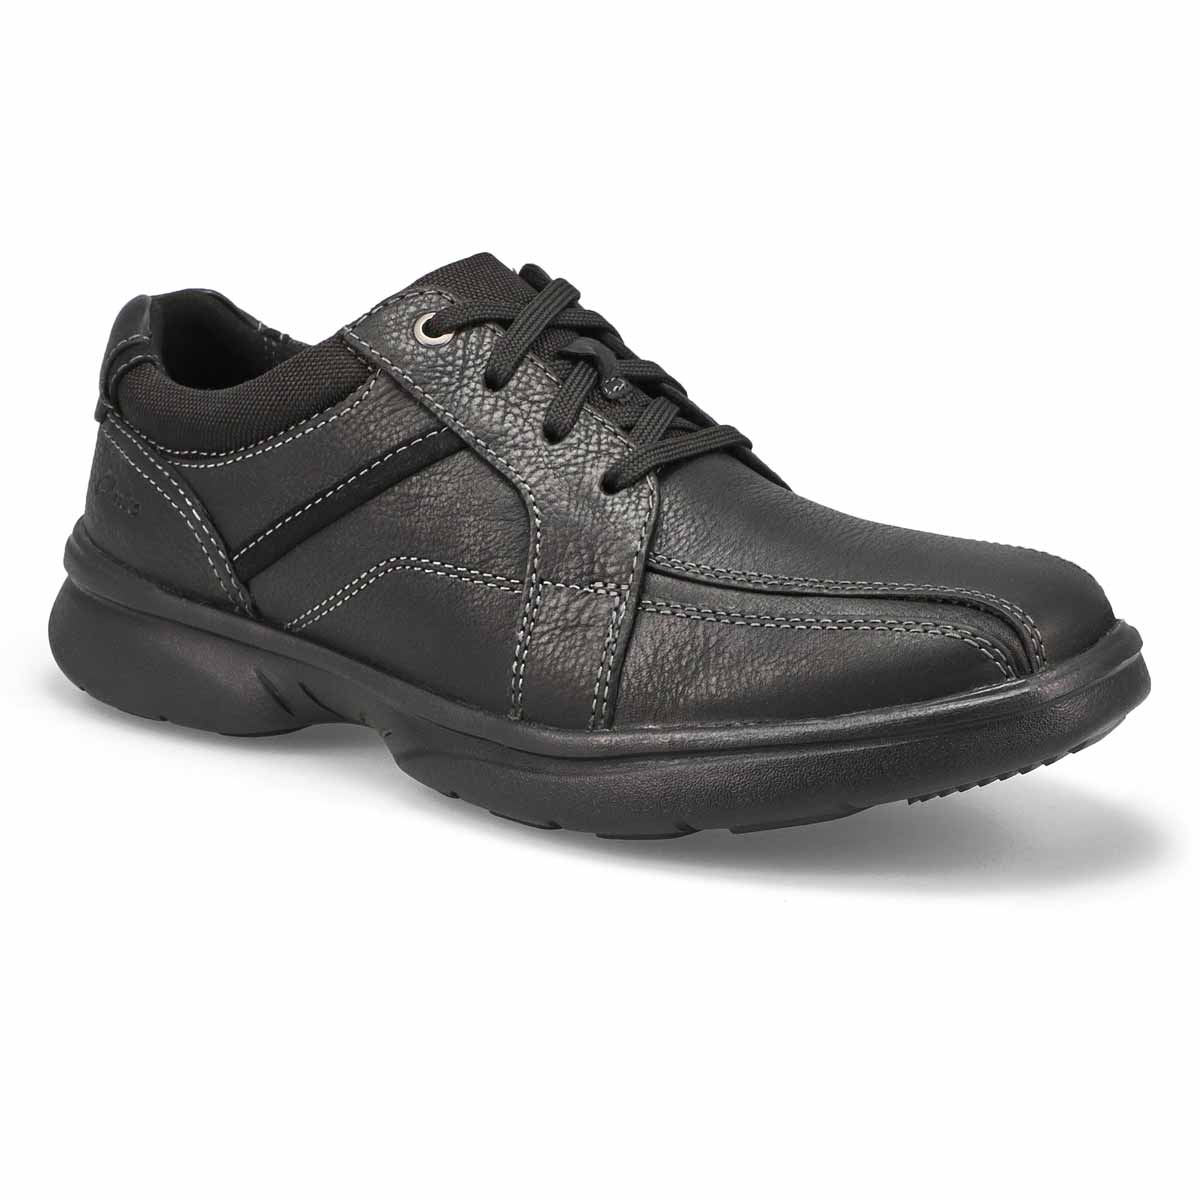 Clarks Men's Bradley Walk Lace Up Casual Loaf | SoftMoc.com